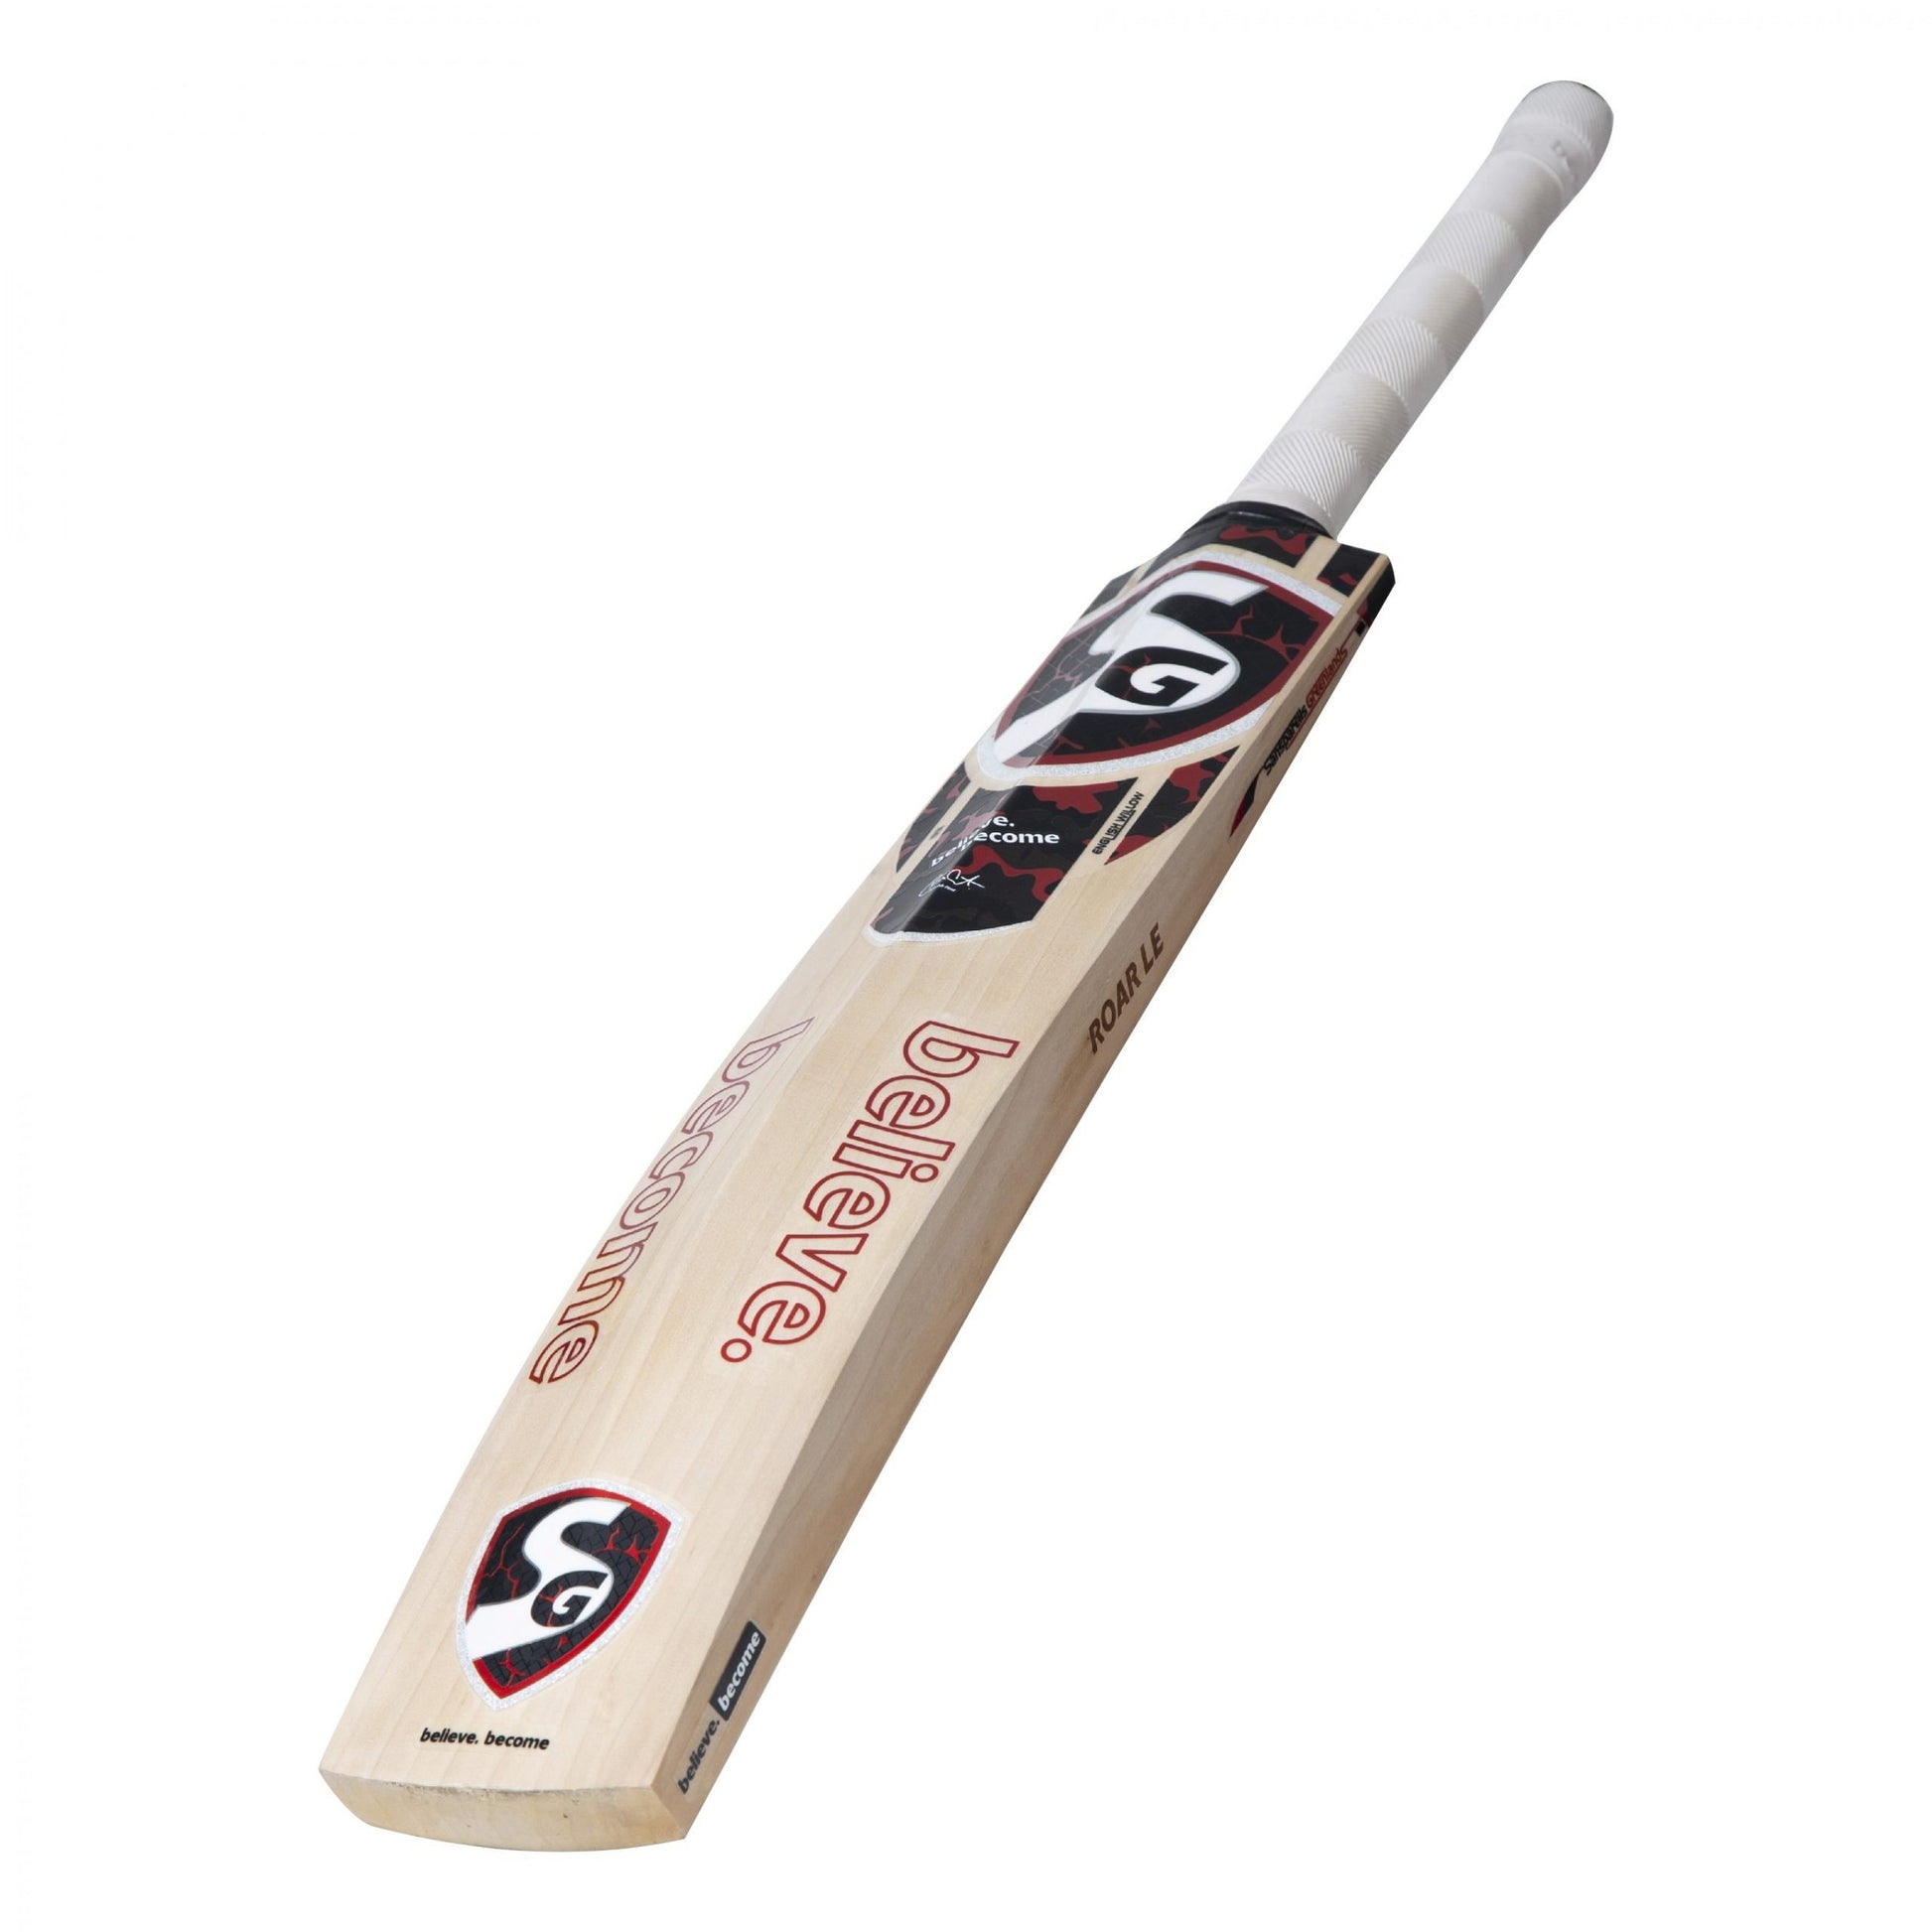 SG Roar LE - Grade 2 Worlds Finest English Willow highest quality Bat (Leather Ball)